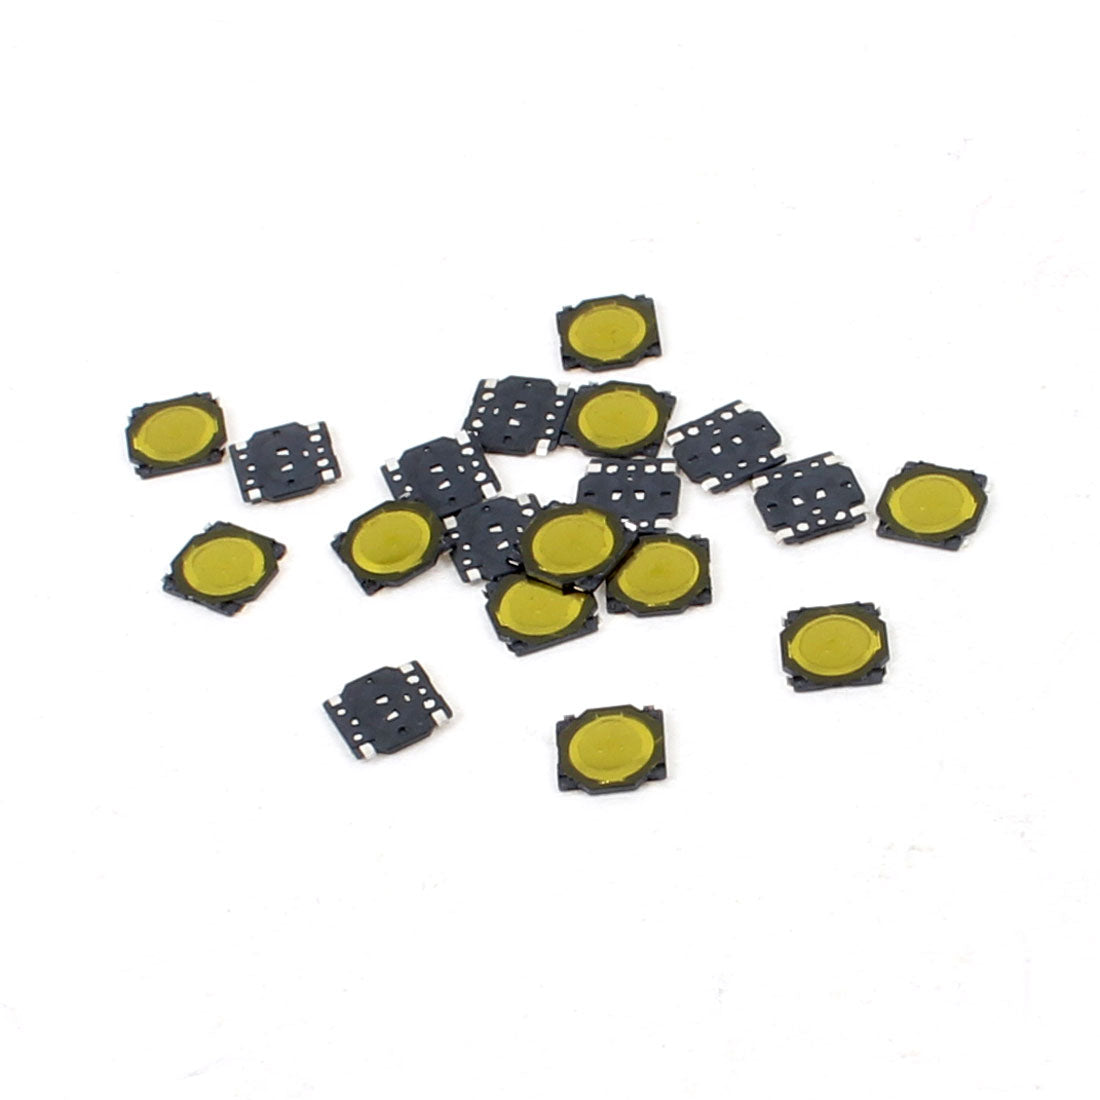 uxcell Uxcell 20 Pcs 3.7x3.7x0.35mm 4Pin Momentary Push Button PCB Surface Mounted Devices SMT Tactile Tact Switch